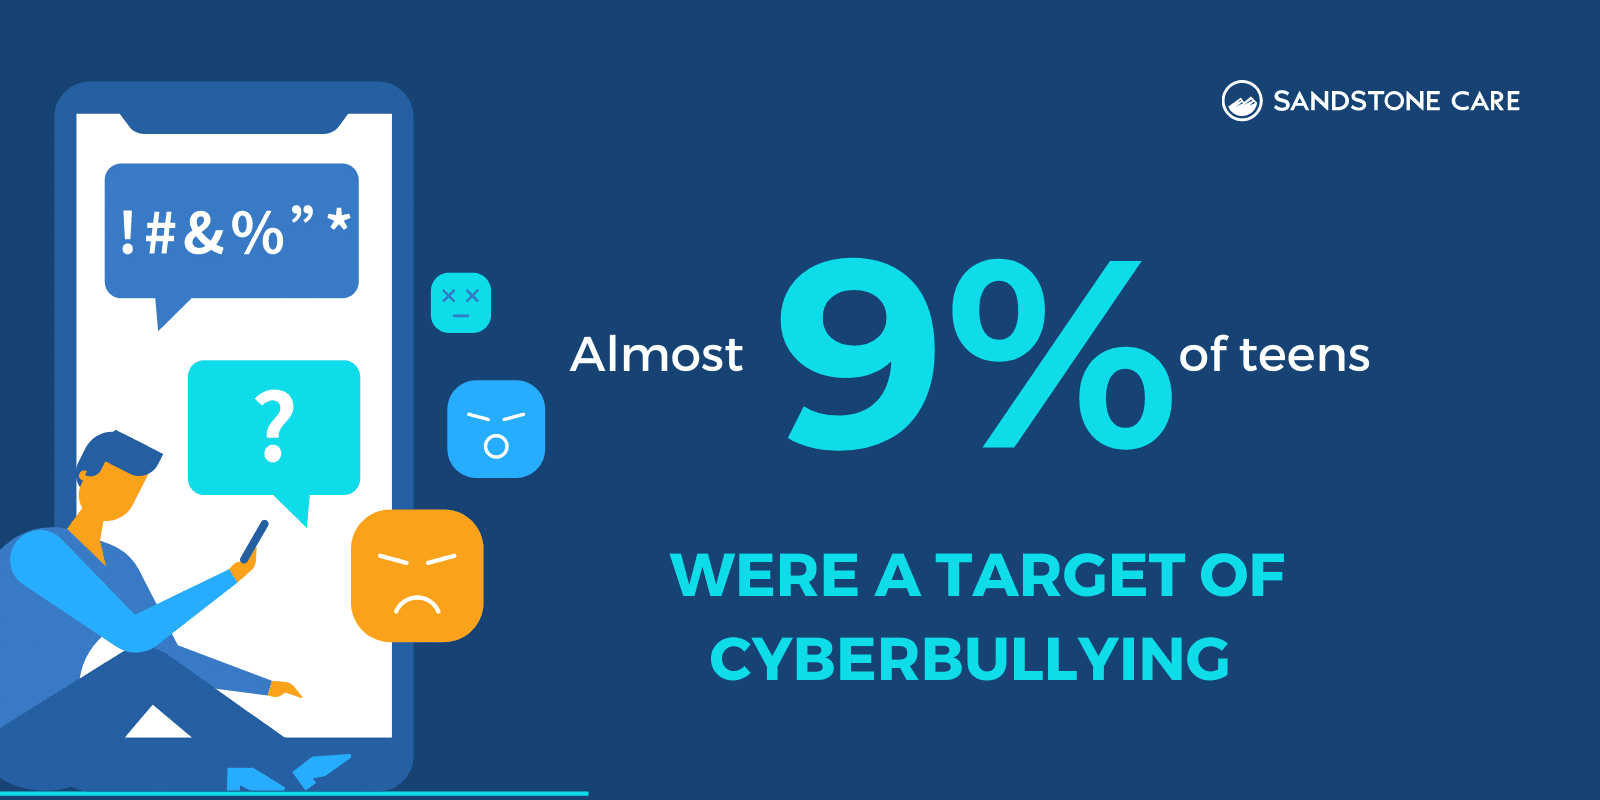 "Almost 9% of teens were a target of cyberbullying" written next to a boy looking at his smartphone with mean texts